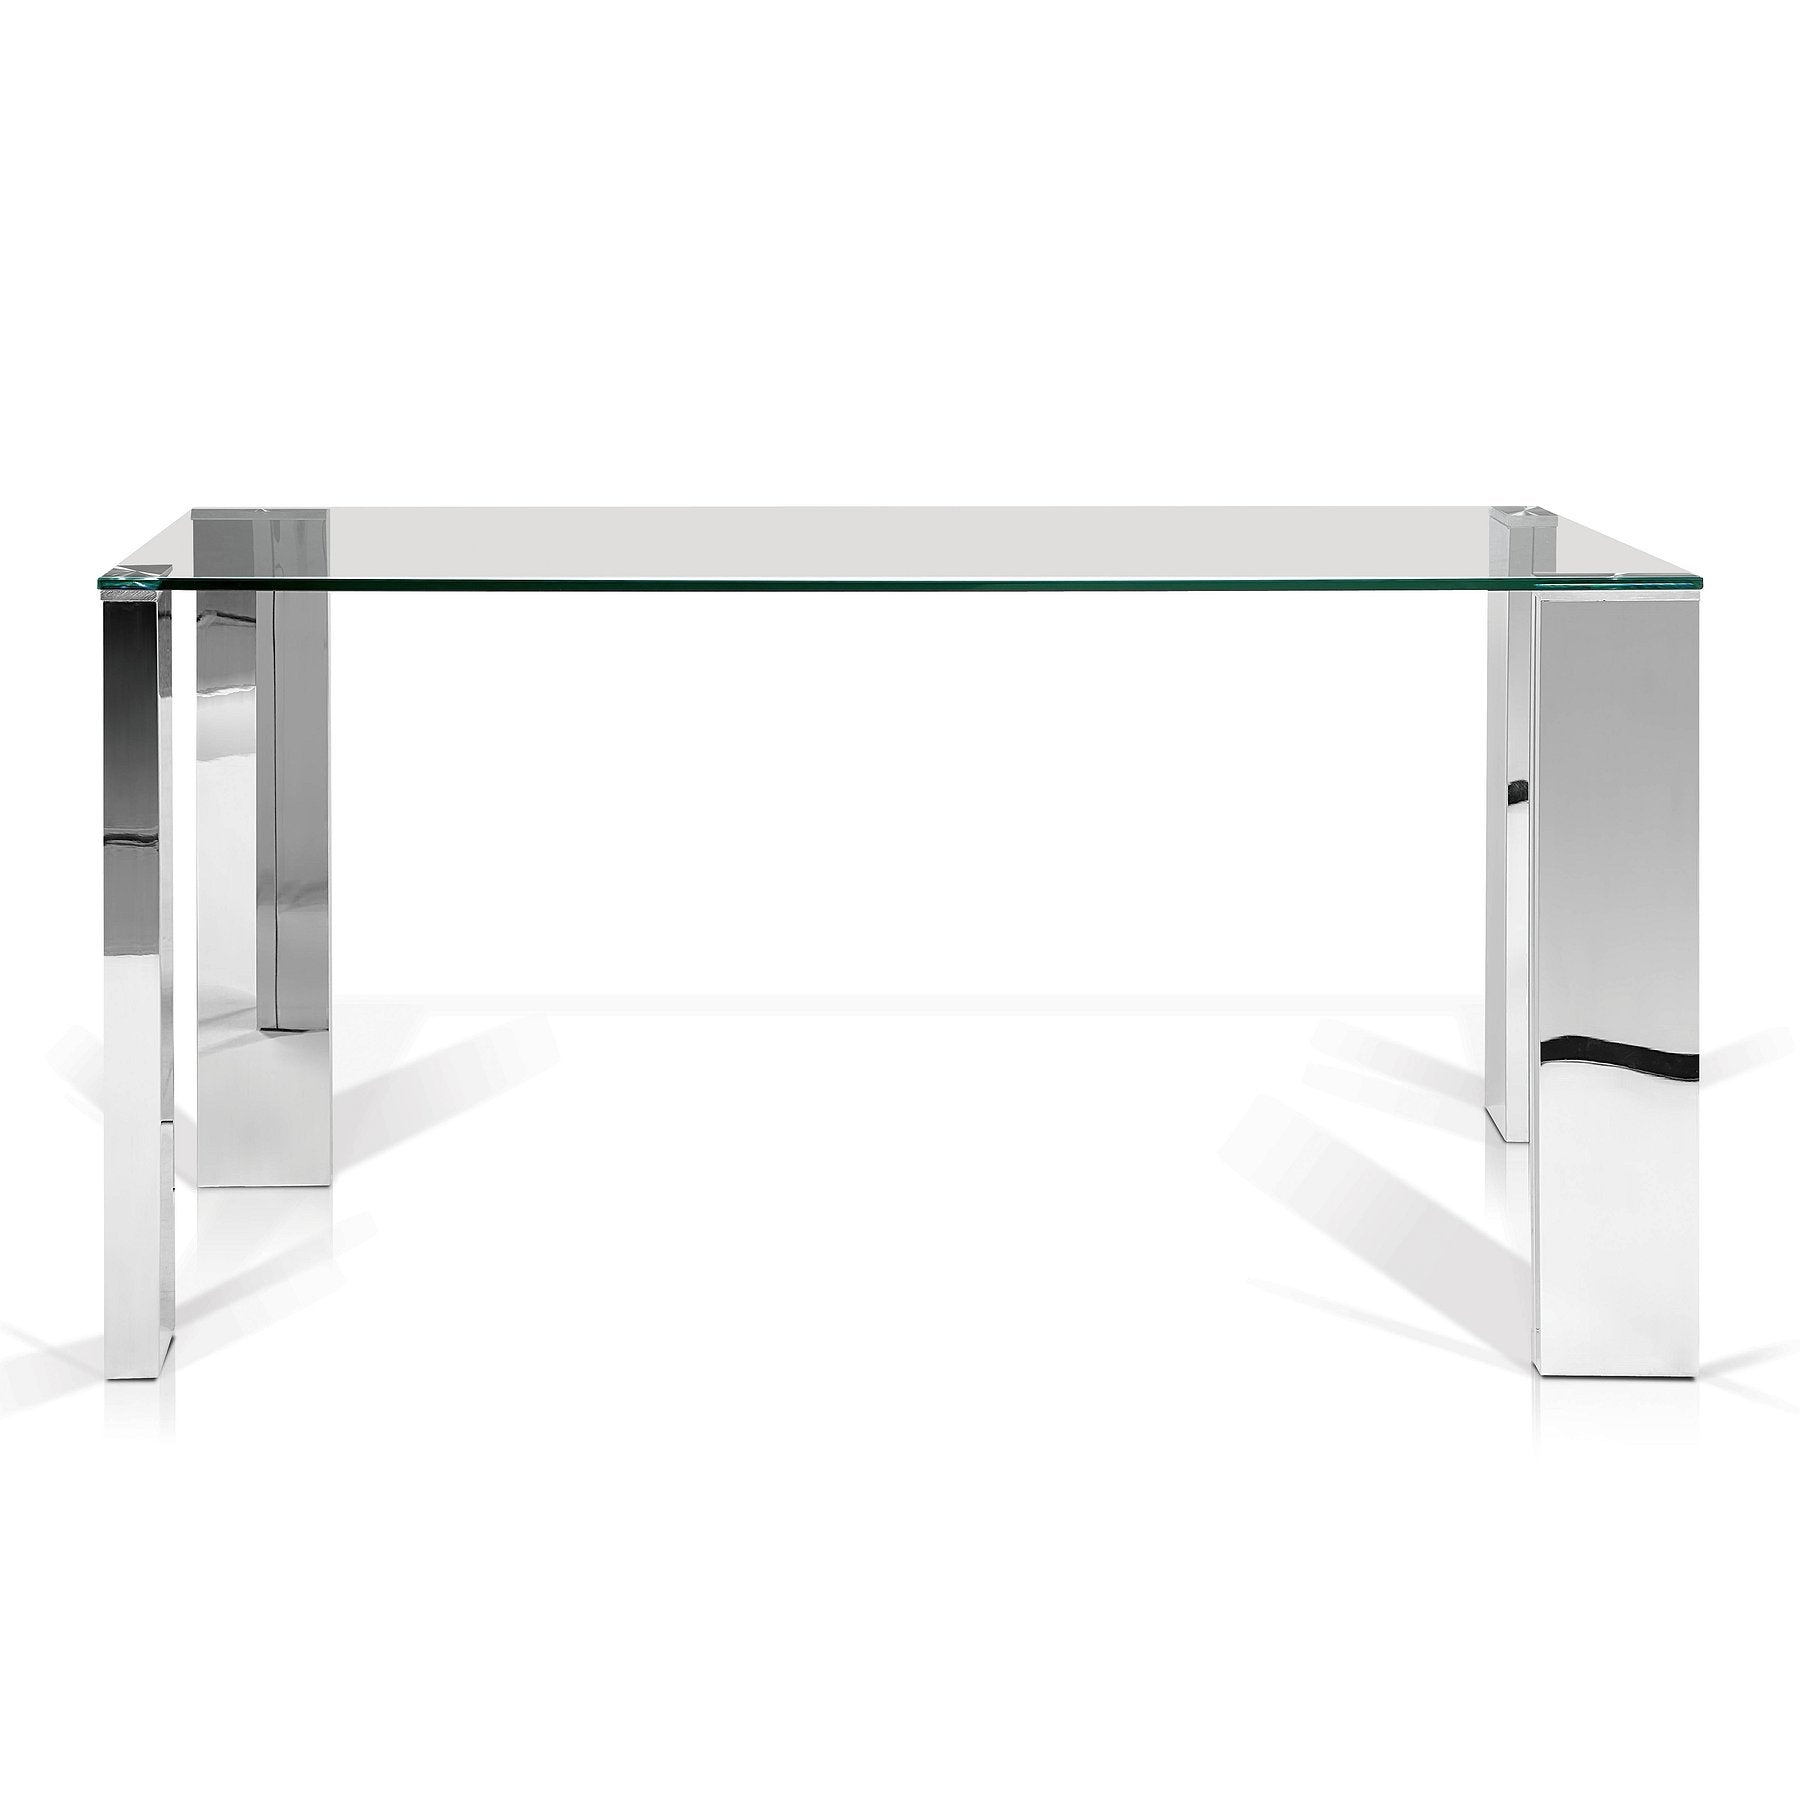 YT1523 baron - dining table - Dreamart Gallery